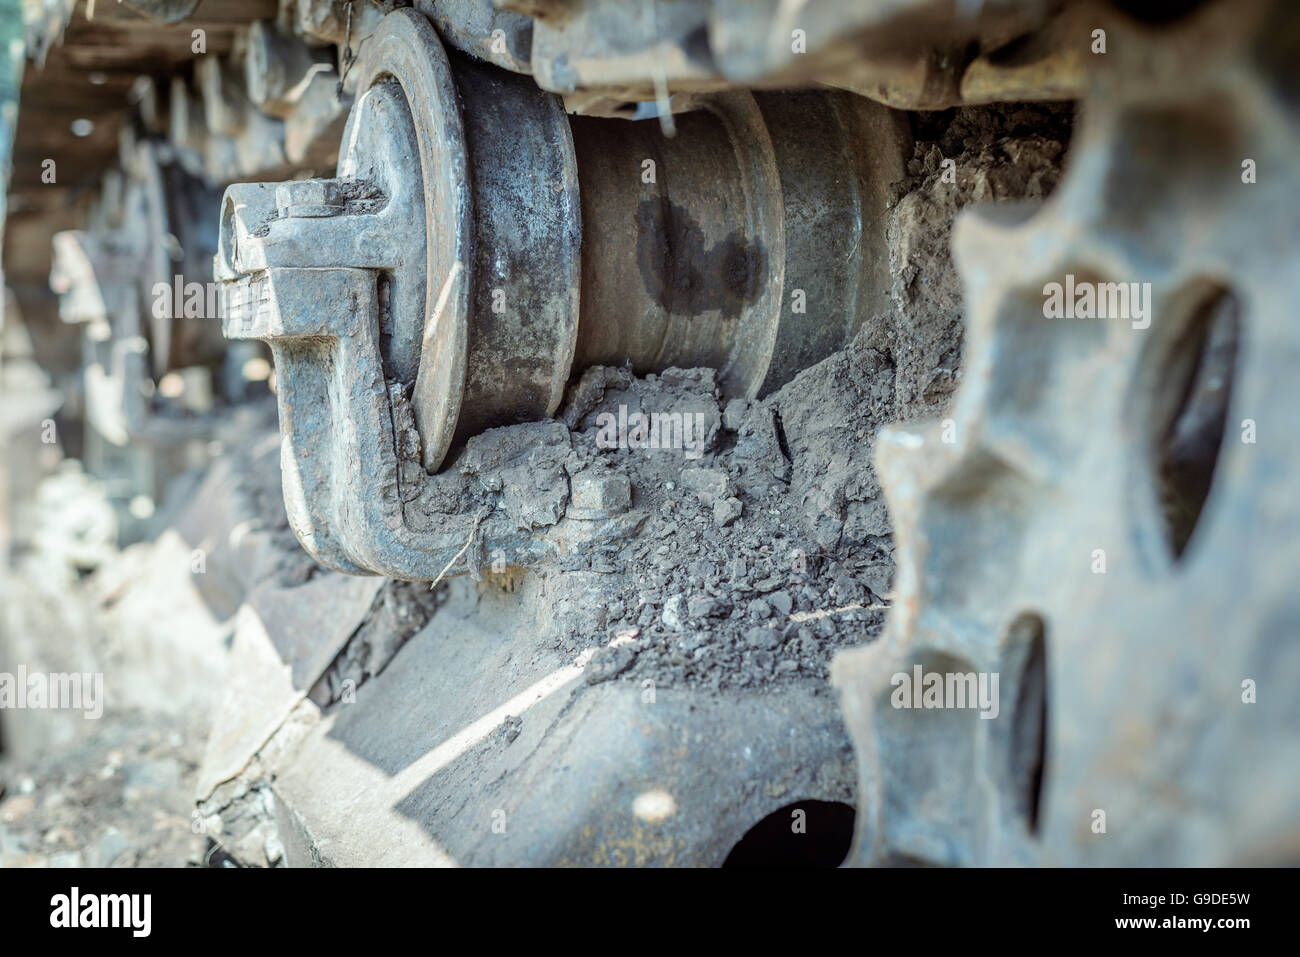 Aged abandoned industrial machine with corroded dirt stained caterpillar tracks and cogs. Stock Photo